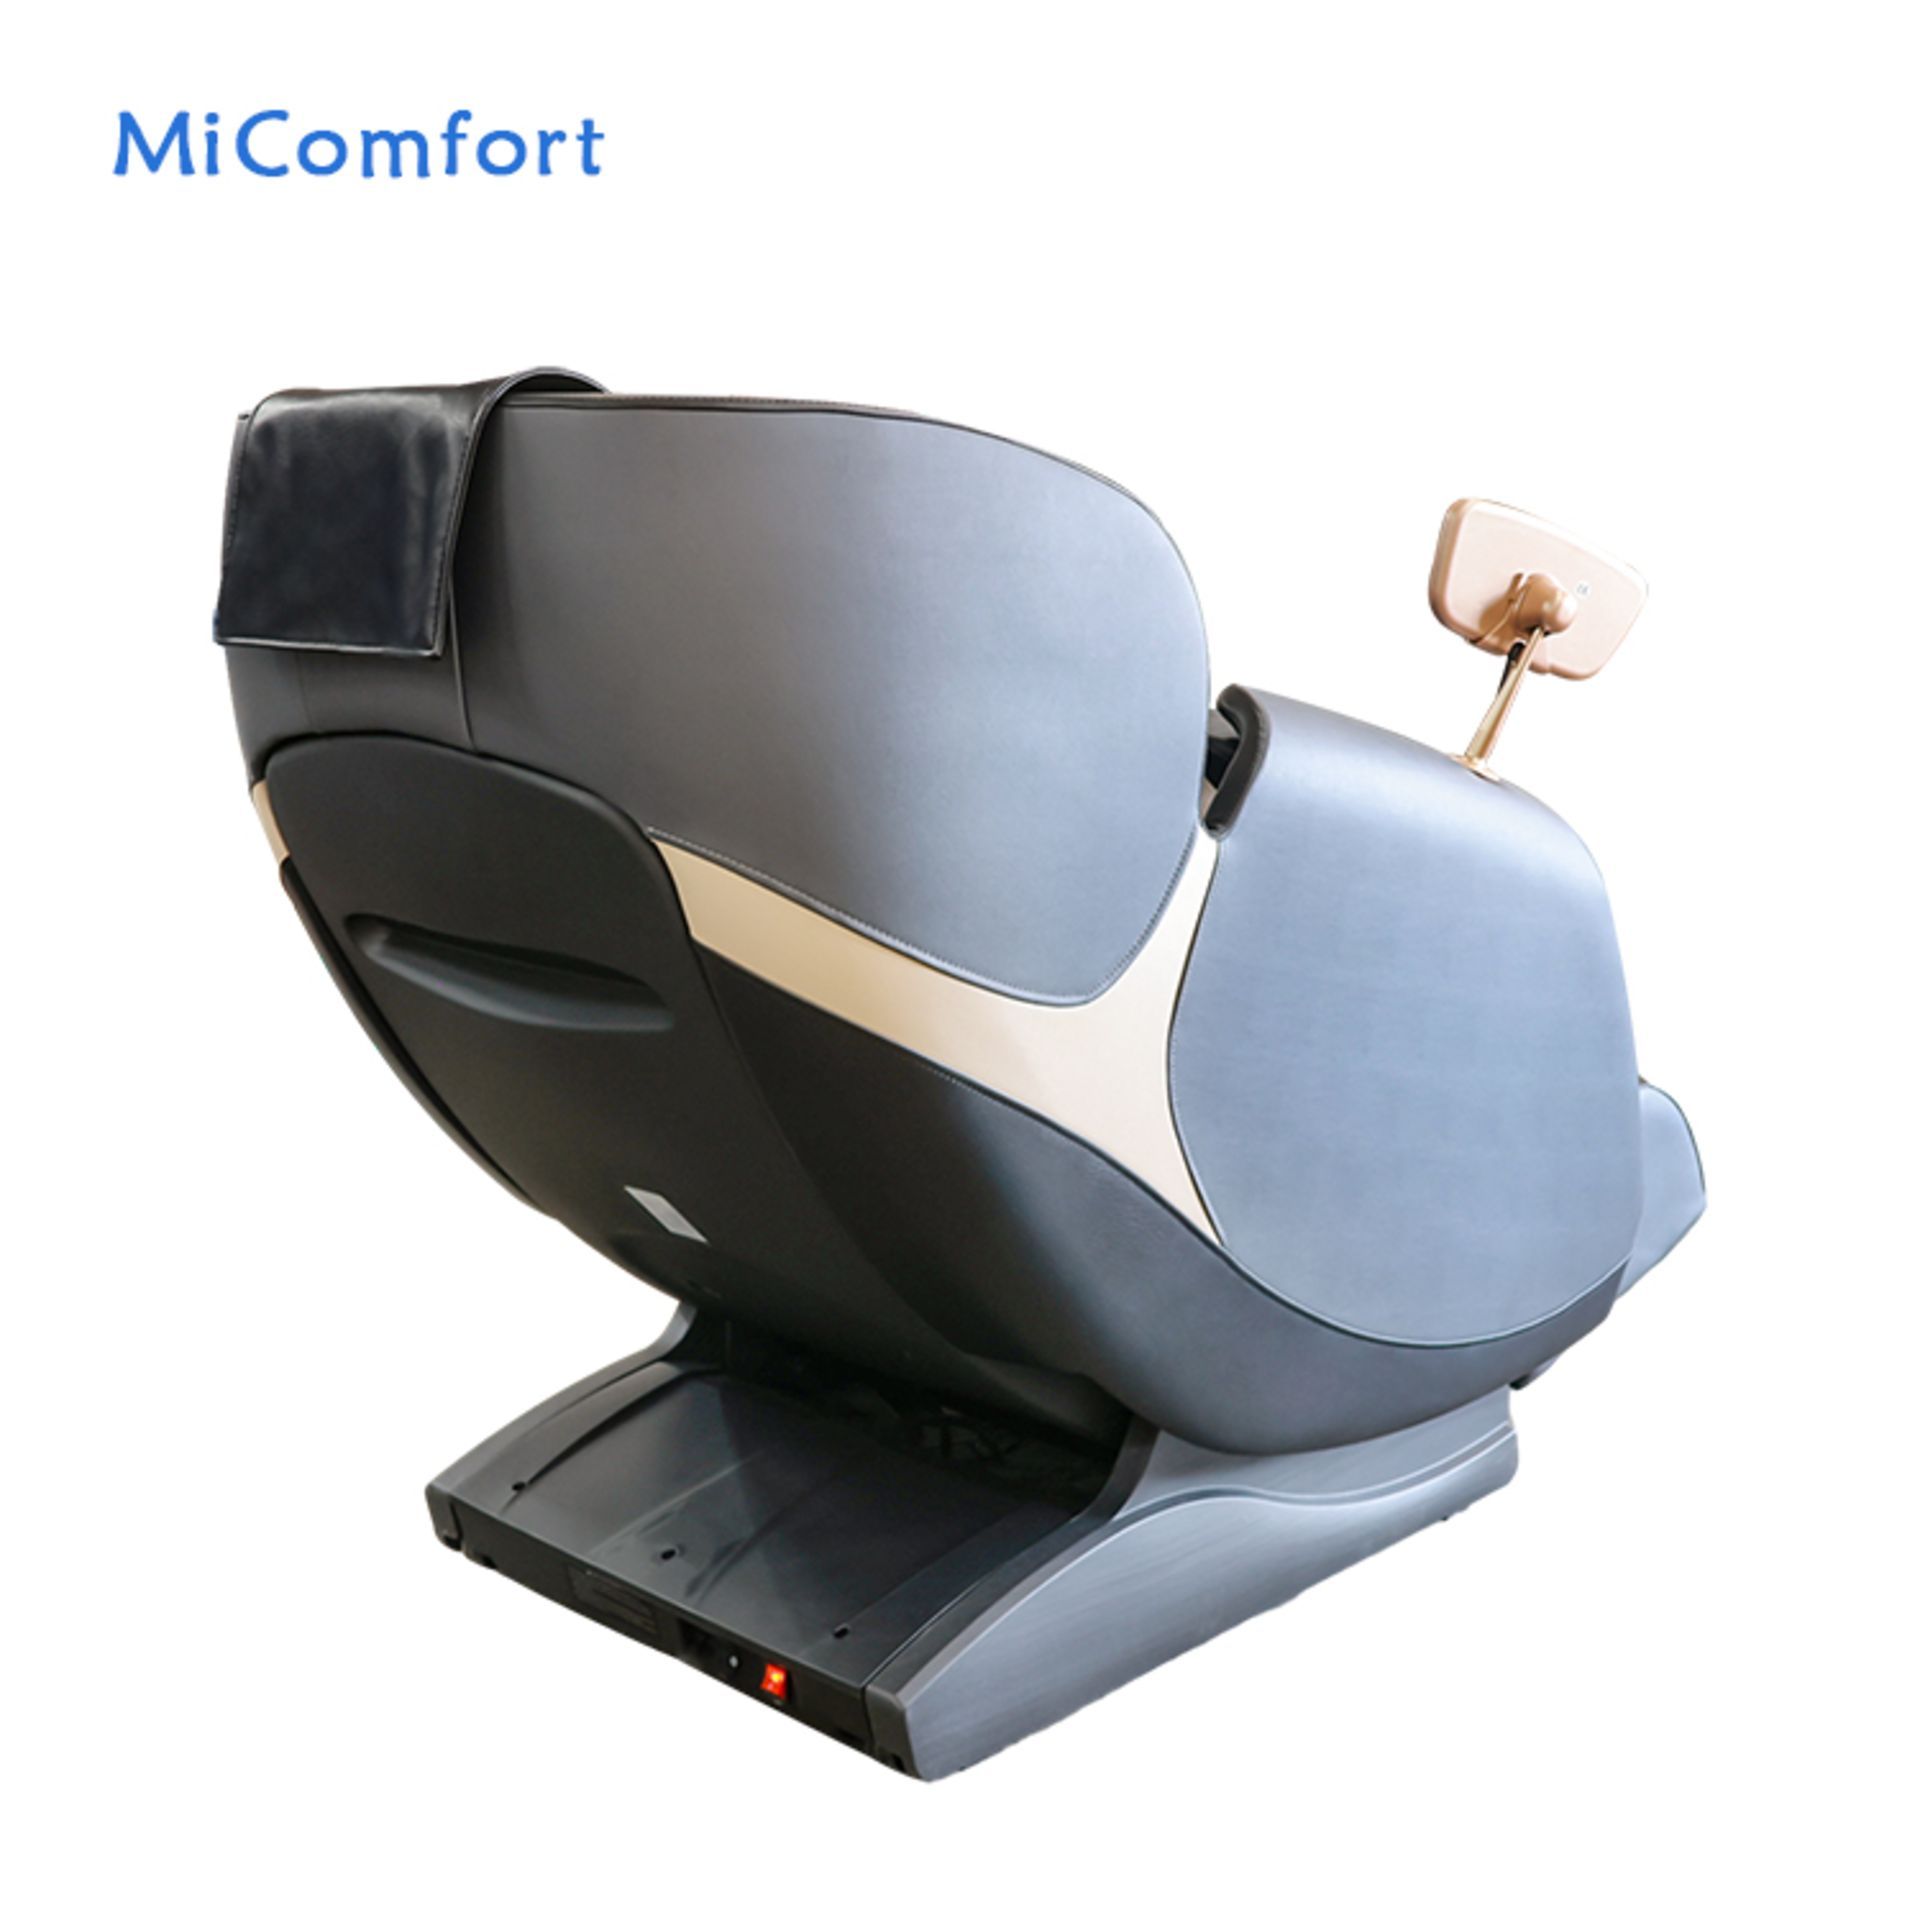 Brand New in Box Orchid Blue/Black MiComfort Full Body Massage Chair RRP £2199 *NO VAT* - Image 12 of 14